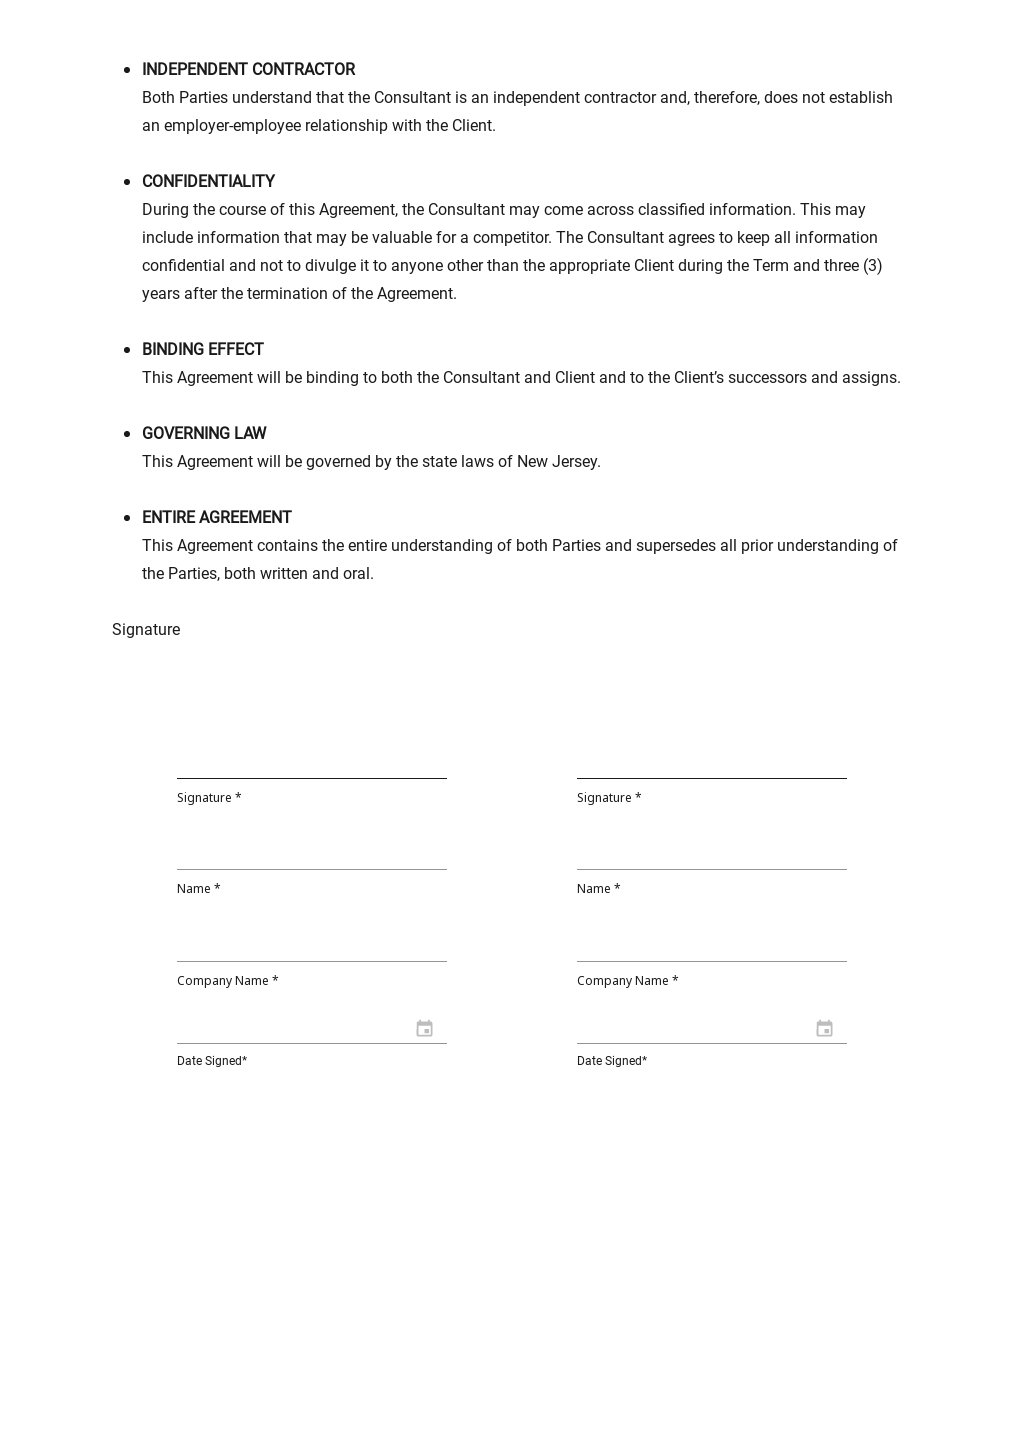 Free Consulting Agreement Template 2.jpe